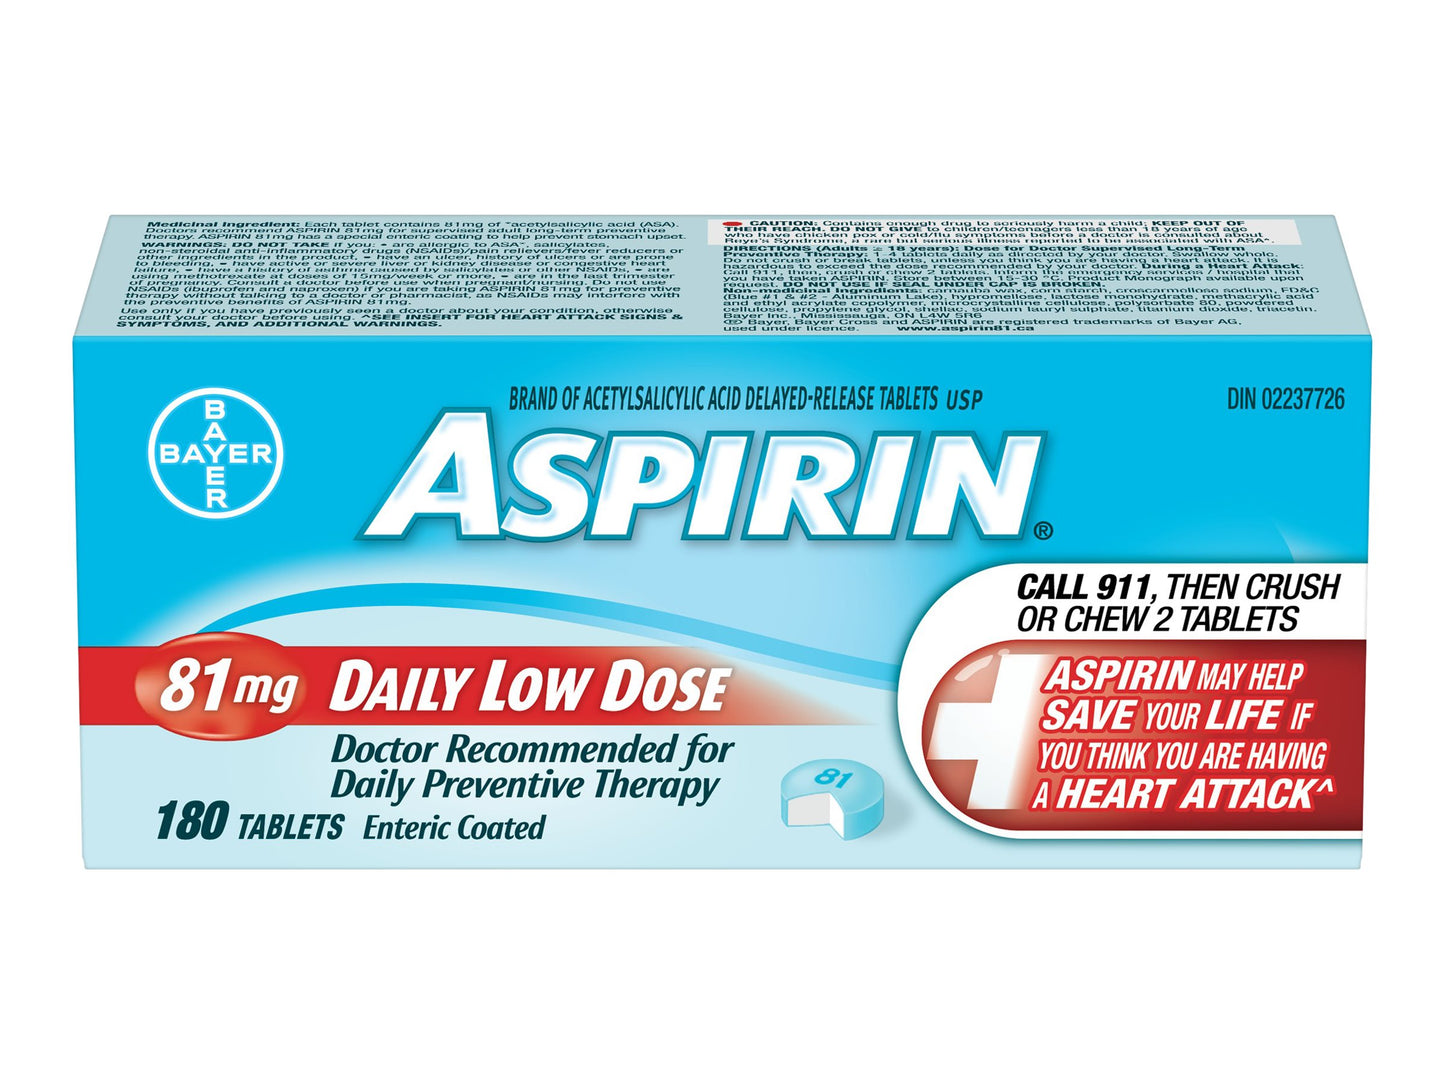 Aspirin 81mg Daily Low Dose 180 Tablets